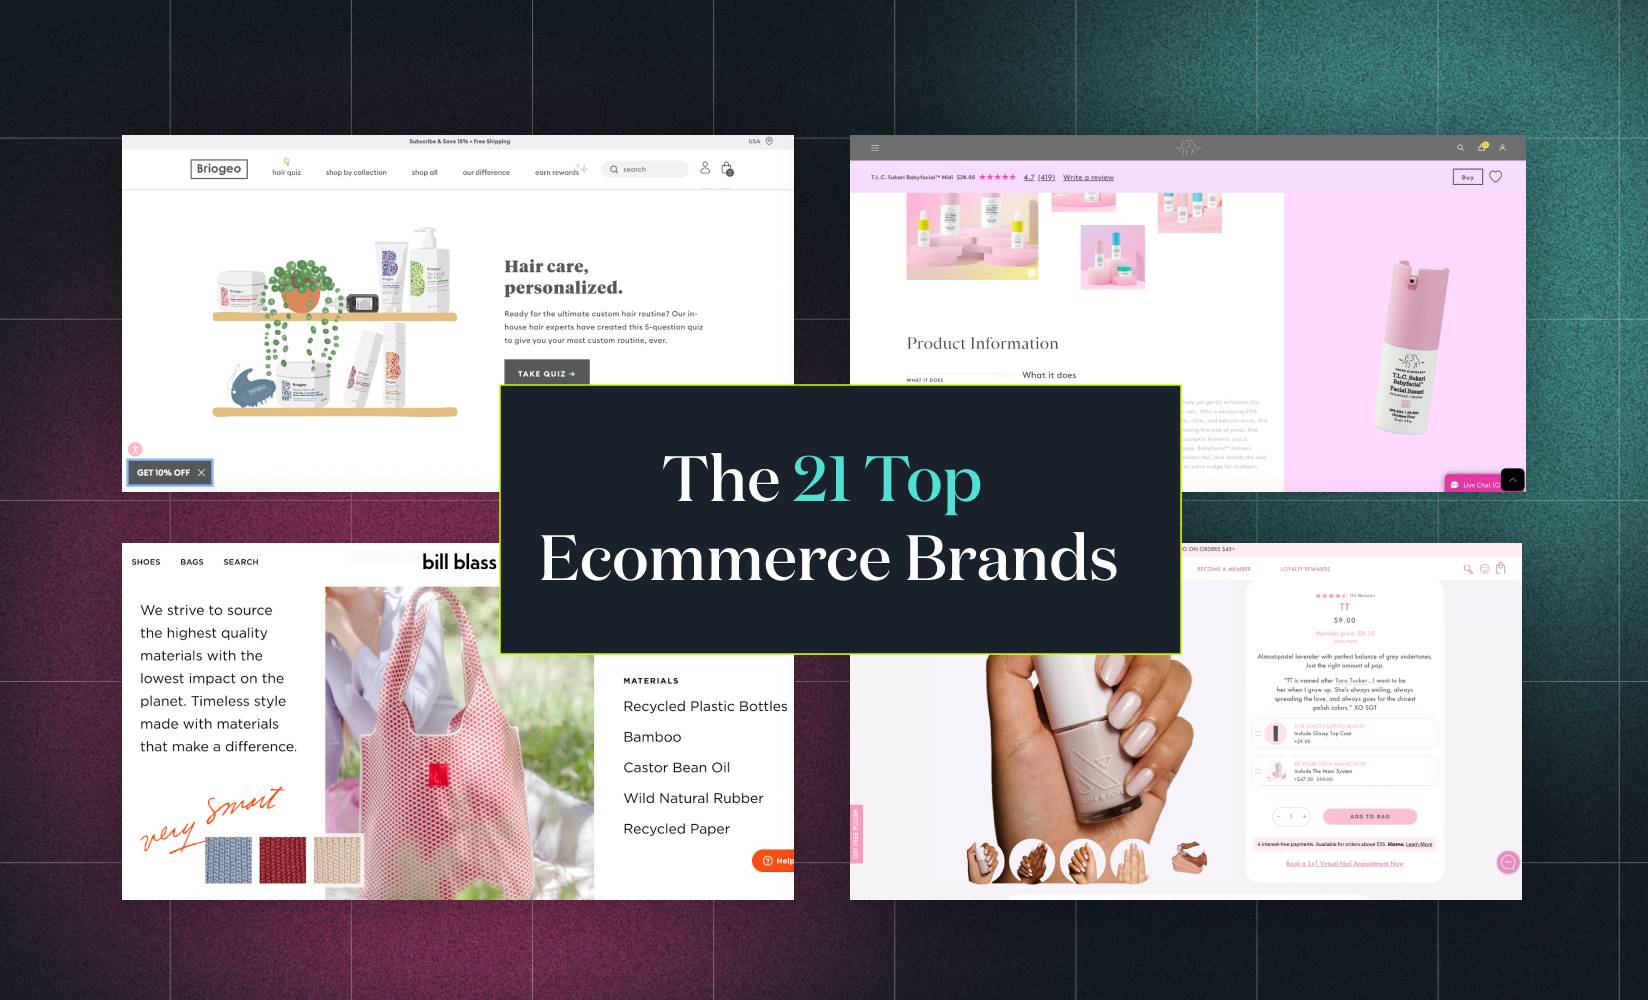 Direct to Consumer DTC brand examples or Top ecommerce companies 1 direct-to-consumer brands